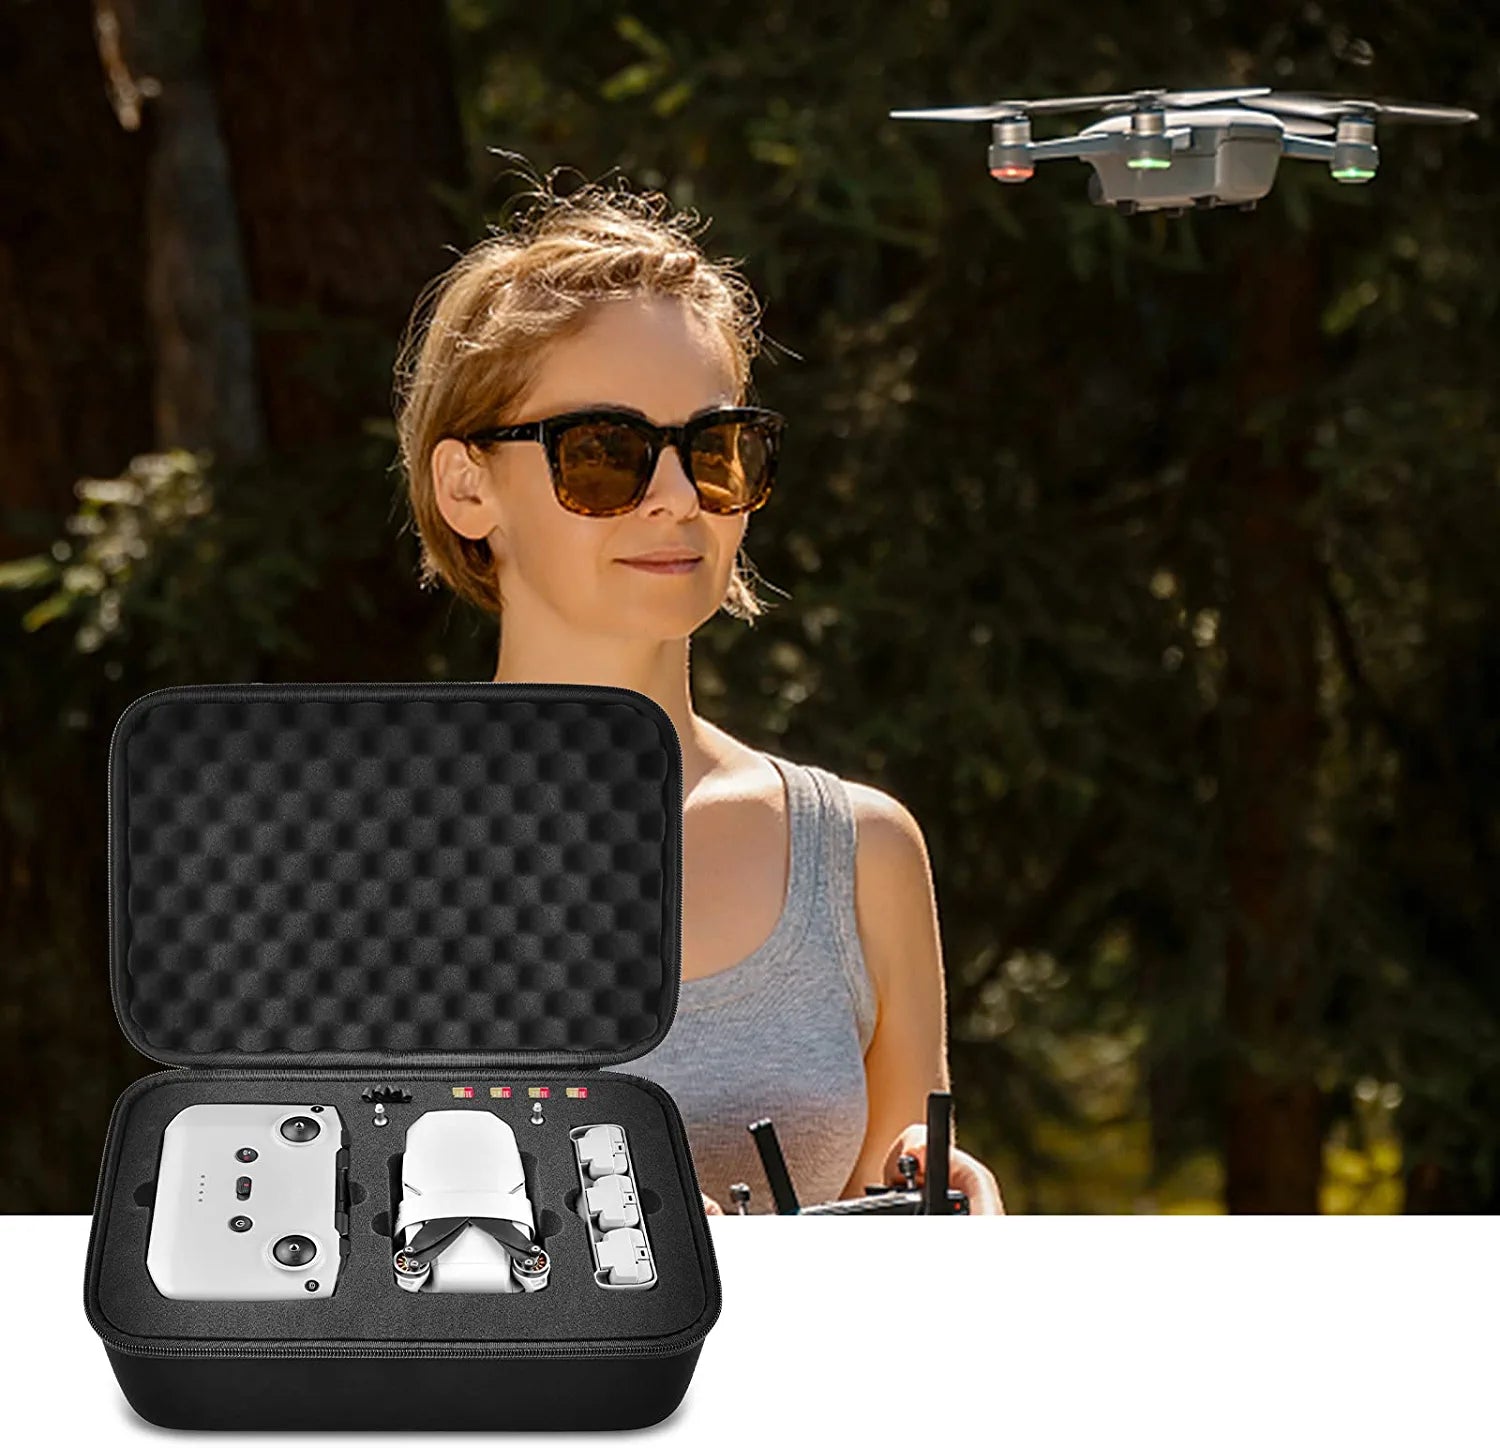 Case Compatible with DJI Mini 2 Fly More Combo Ultralight Foldable Drone, Storage for DJI Mini 2 Drones with Camera, Holds Battery, Propellers, USB Cable, Charging Hub & Accessories- Black (Box Only)